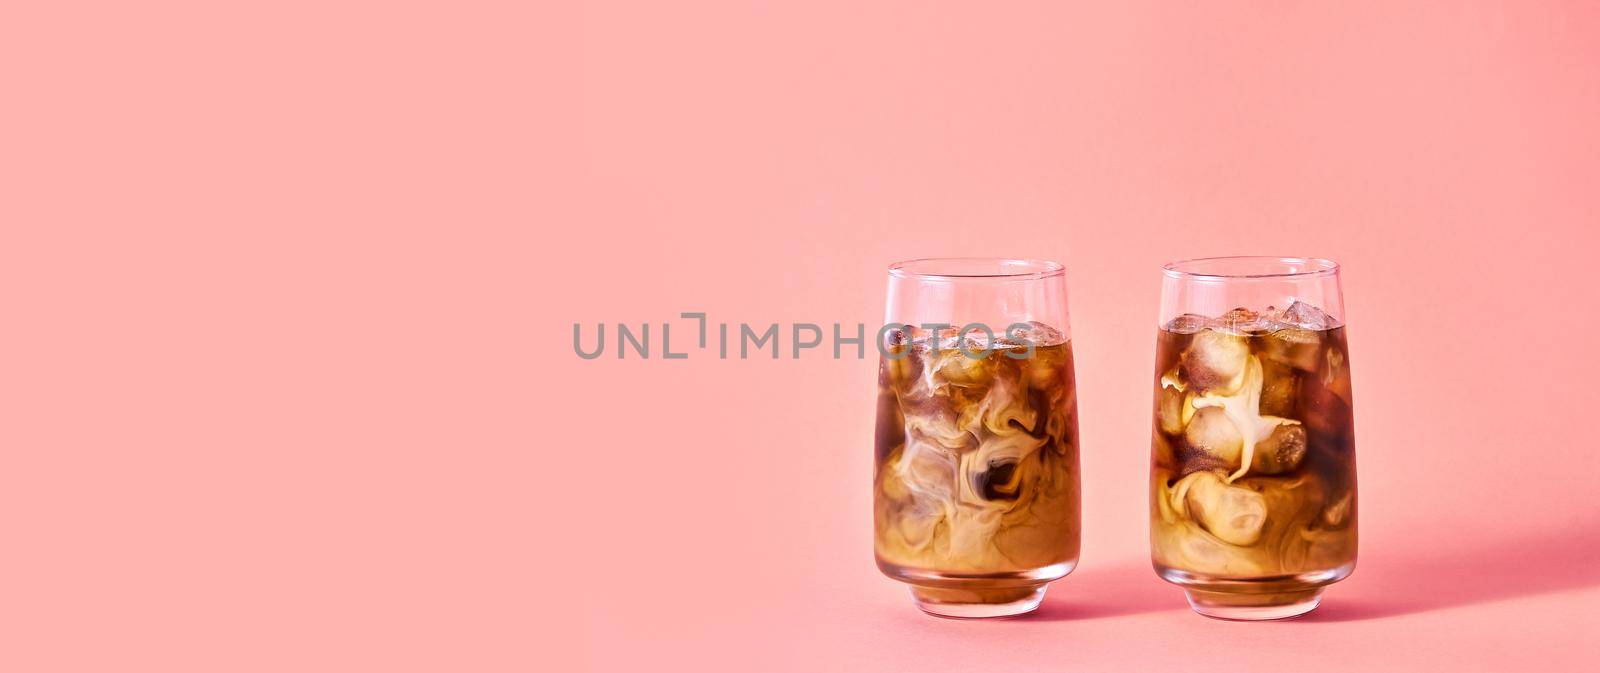 Iced Coffee with Milk in Tall Glasses on Pink Background. Concept Refreshing Summer Drink.